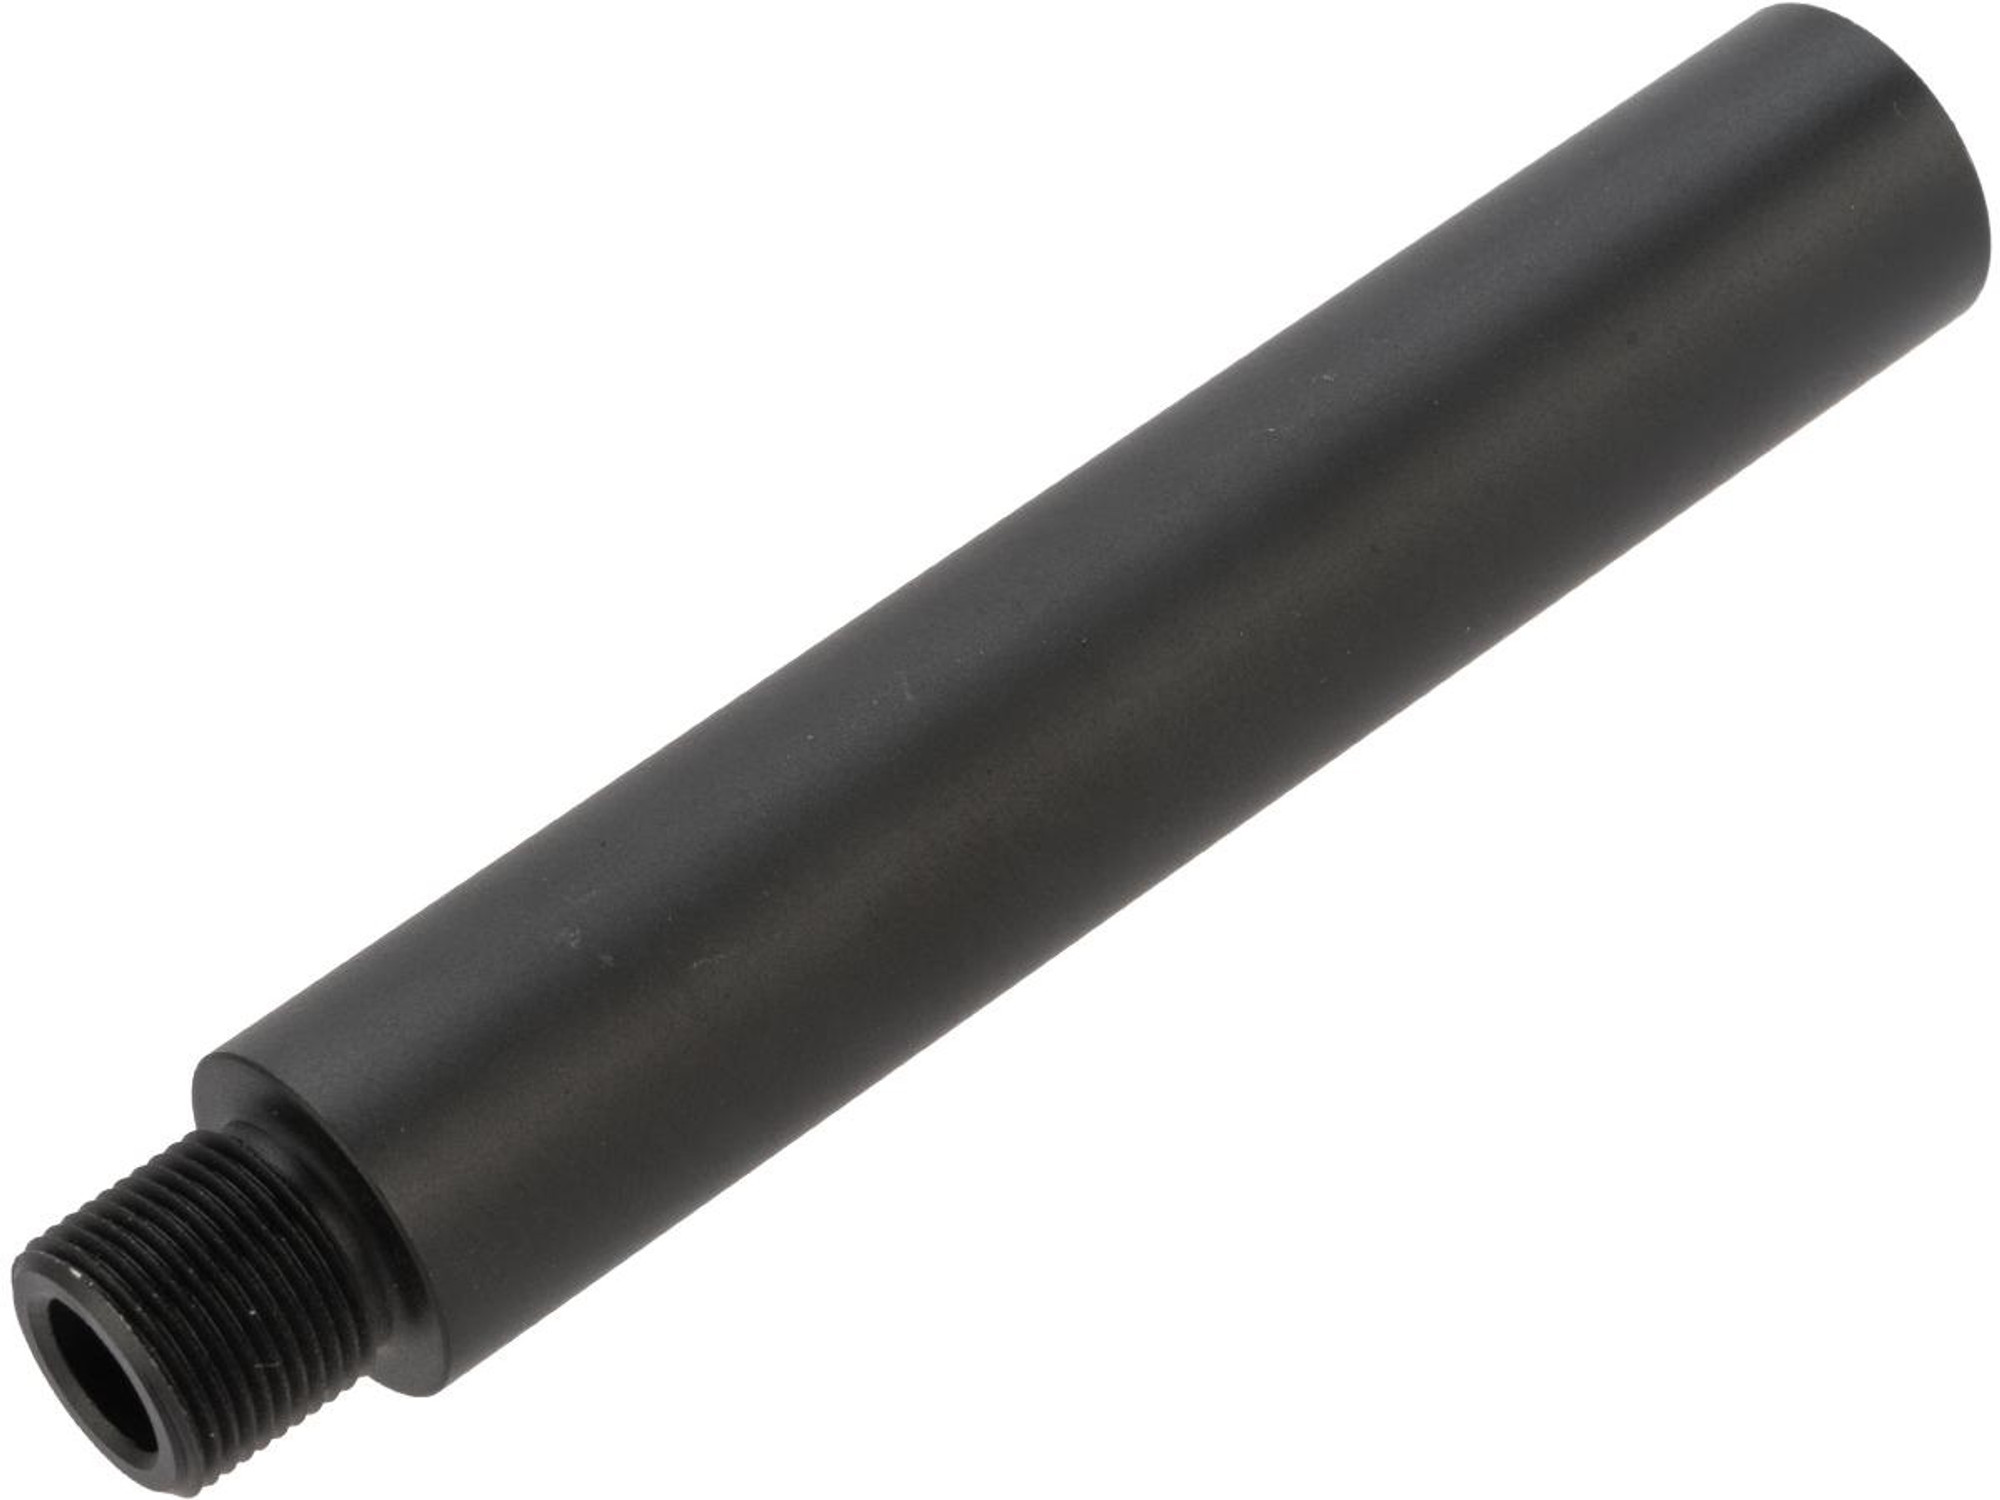 Matrix Airsoft Barrel Thread Adapter (Direction: 14mm Positive to Positive / 4")